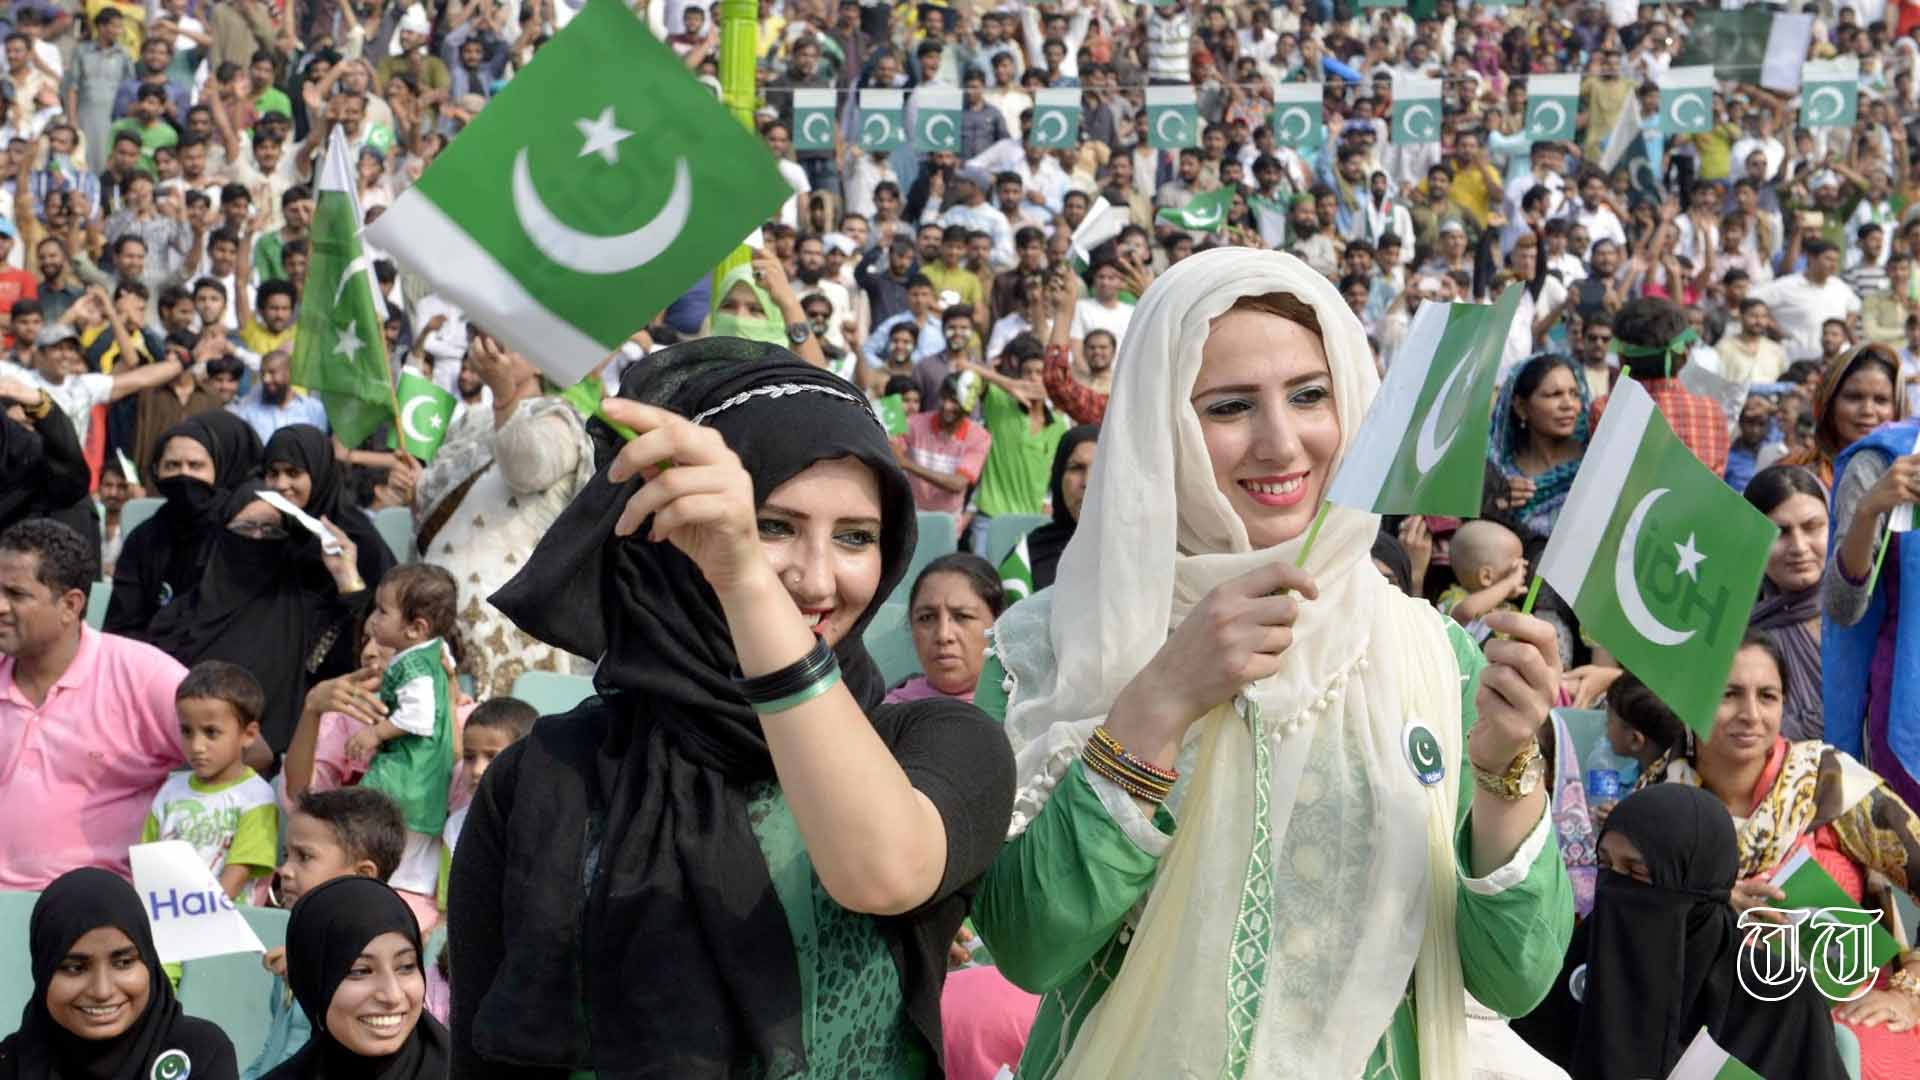 A file photo is shown of Pakistanis celebrating Independence Day in 2018.